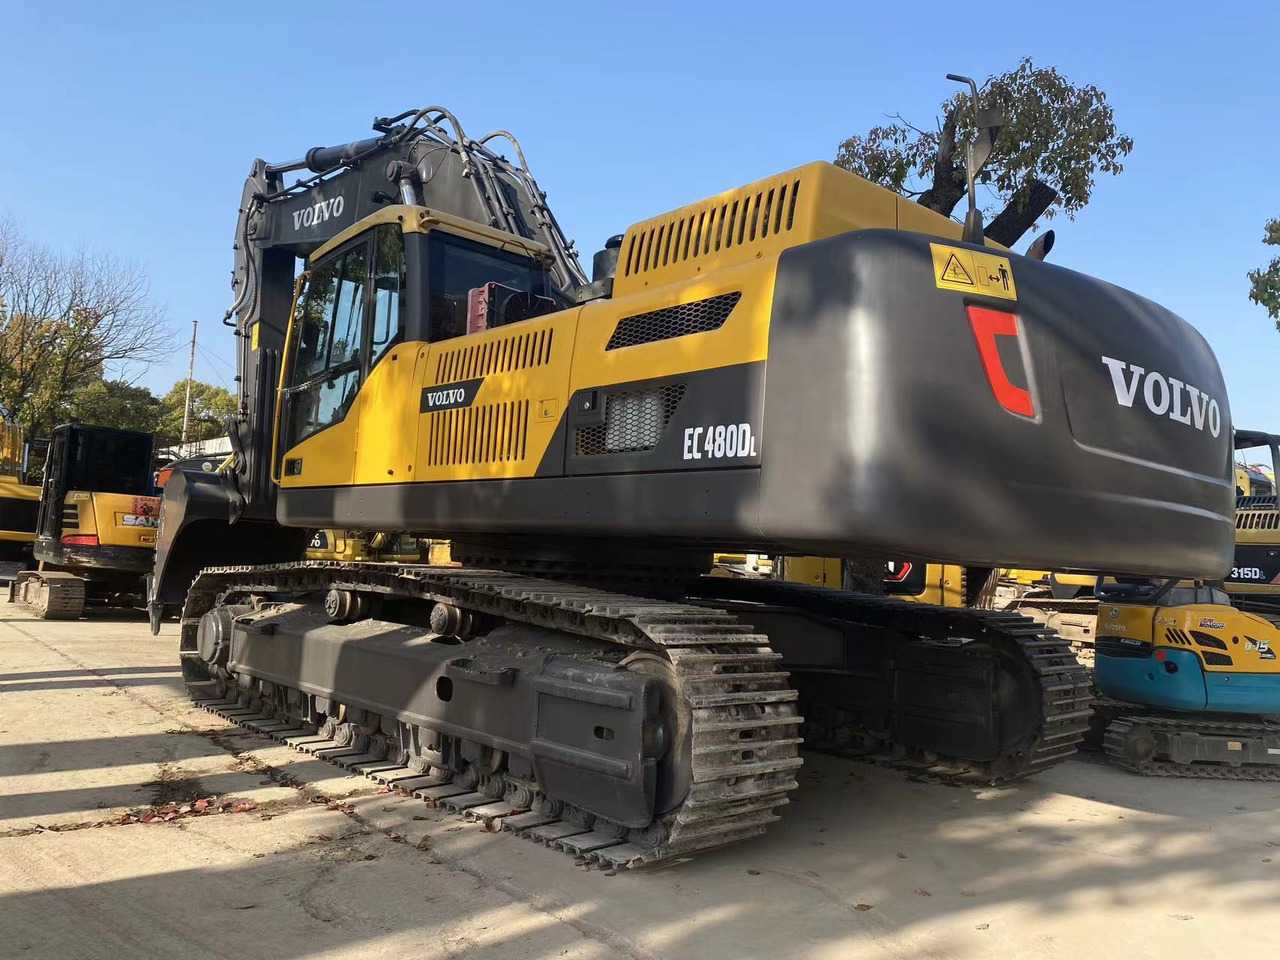 Hot selling original made Used excavator VOLVO EC480DL in stock low price for sale lizing Hot selling original made Used excavator VOLVO EC480DL in stock low price for sale: slika 6